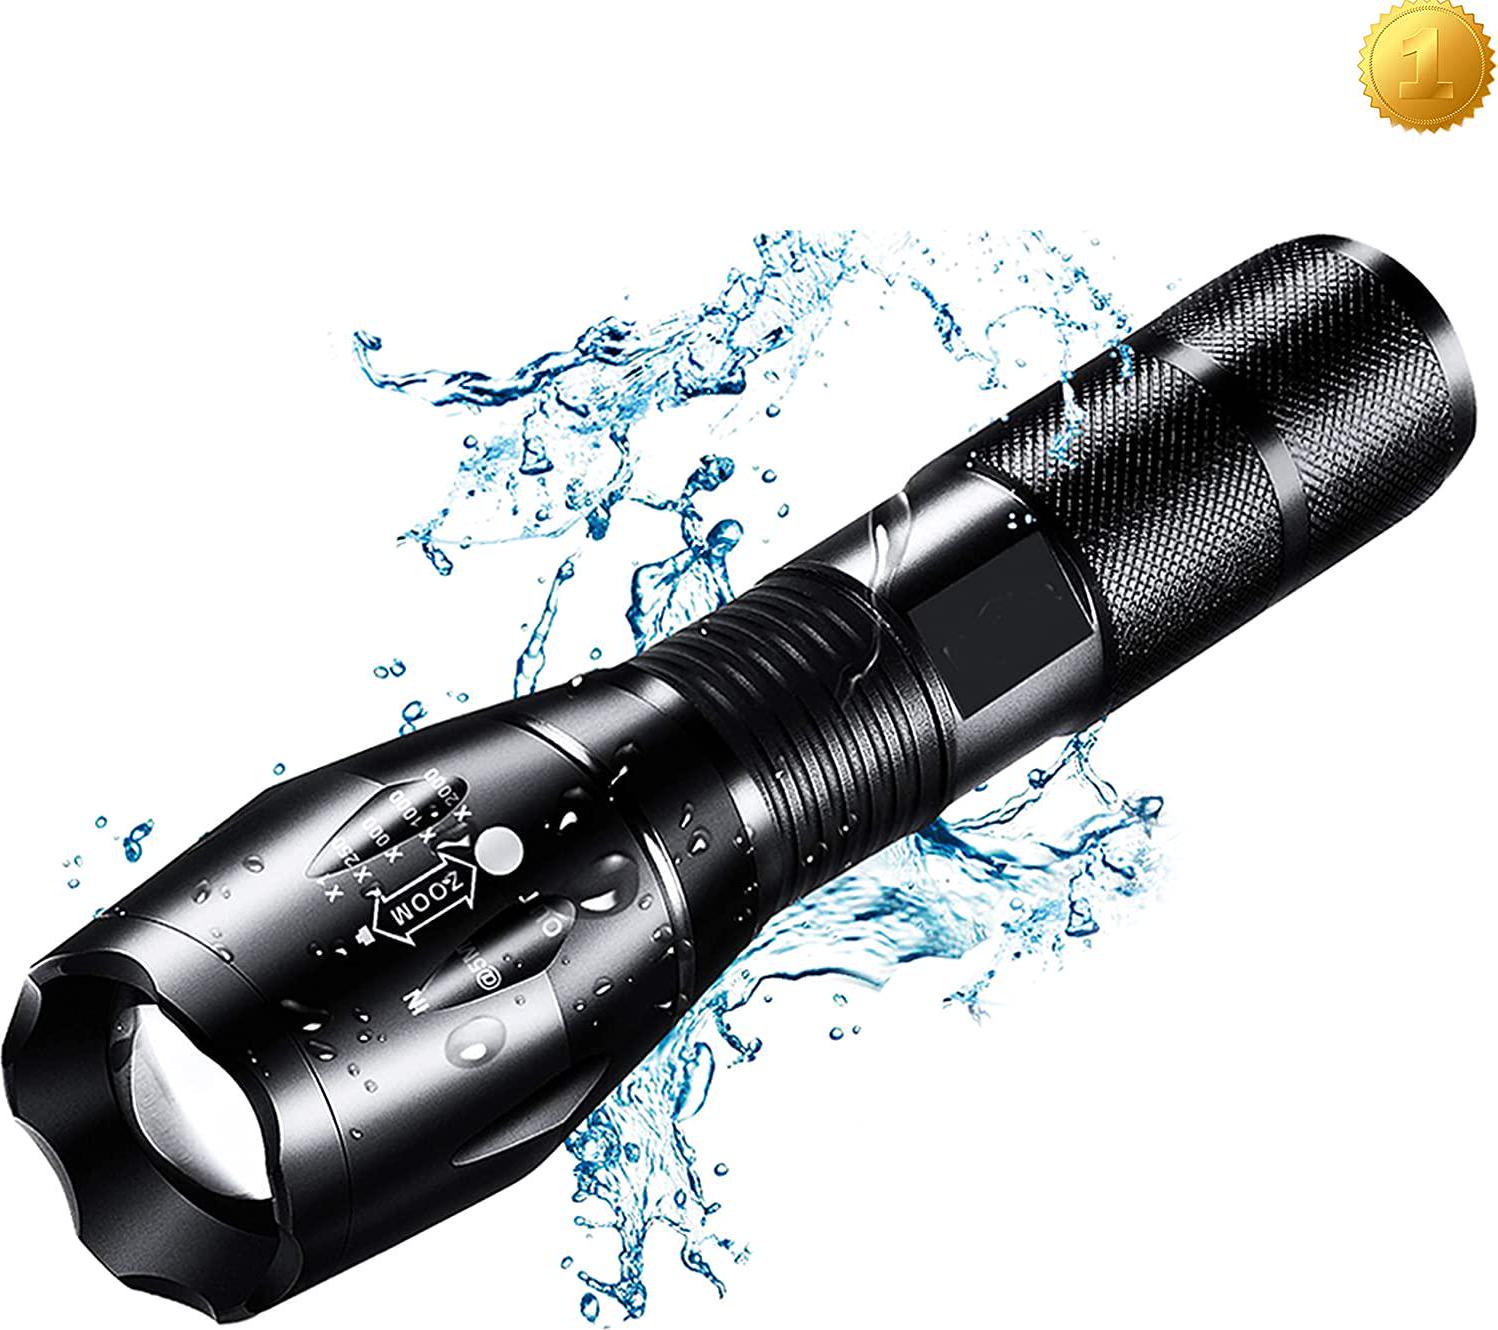 BYMYHO, LED Torches High Lumens Flashlights Tactical Flashlight with Adjustable Focus a Water Resistant Torch for Outdoor, Emergency, Power Outage, Camping, Hiking (Black)